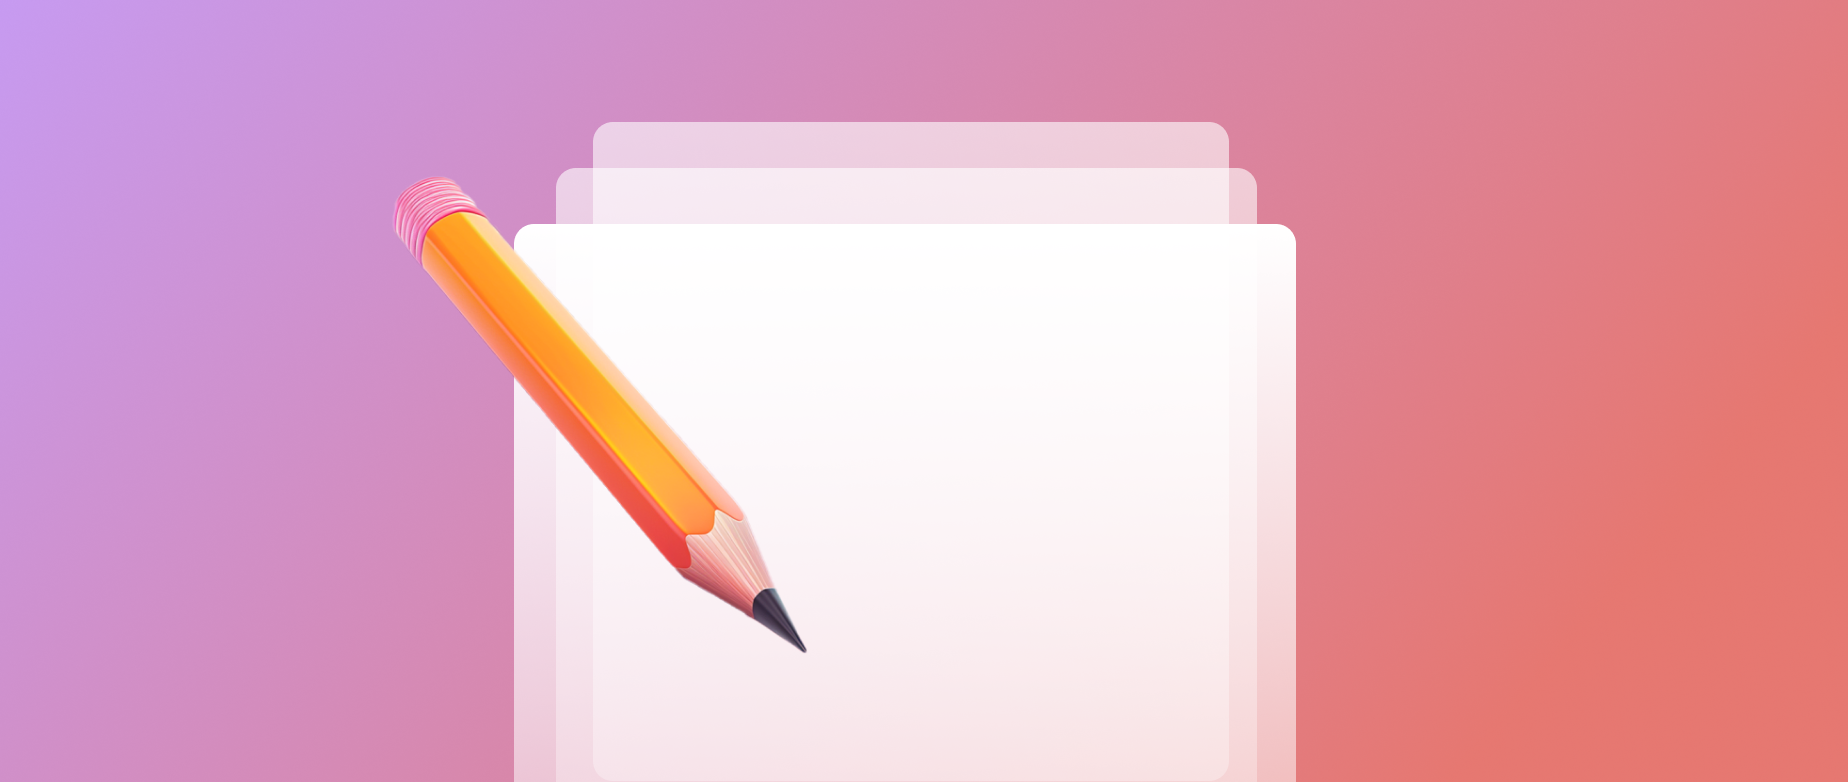 A digital pencil and paper on a pink purple background.